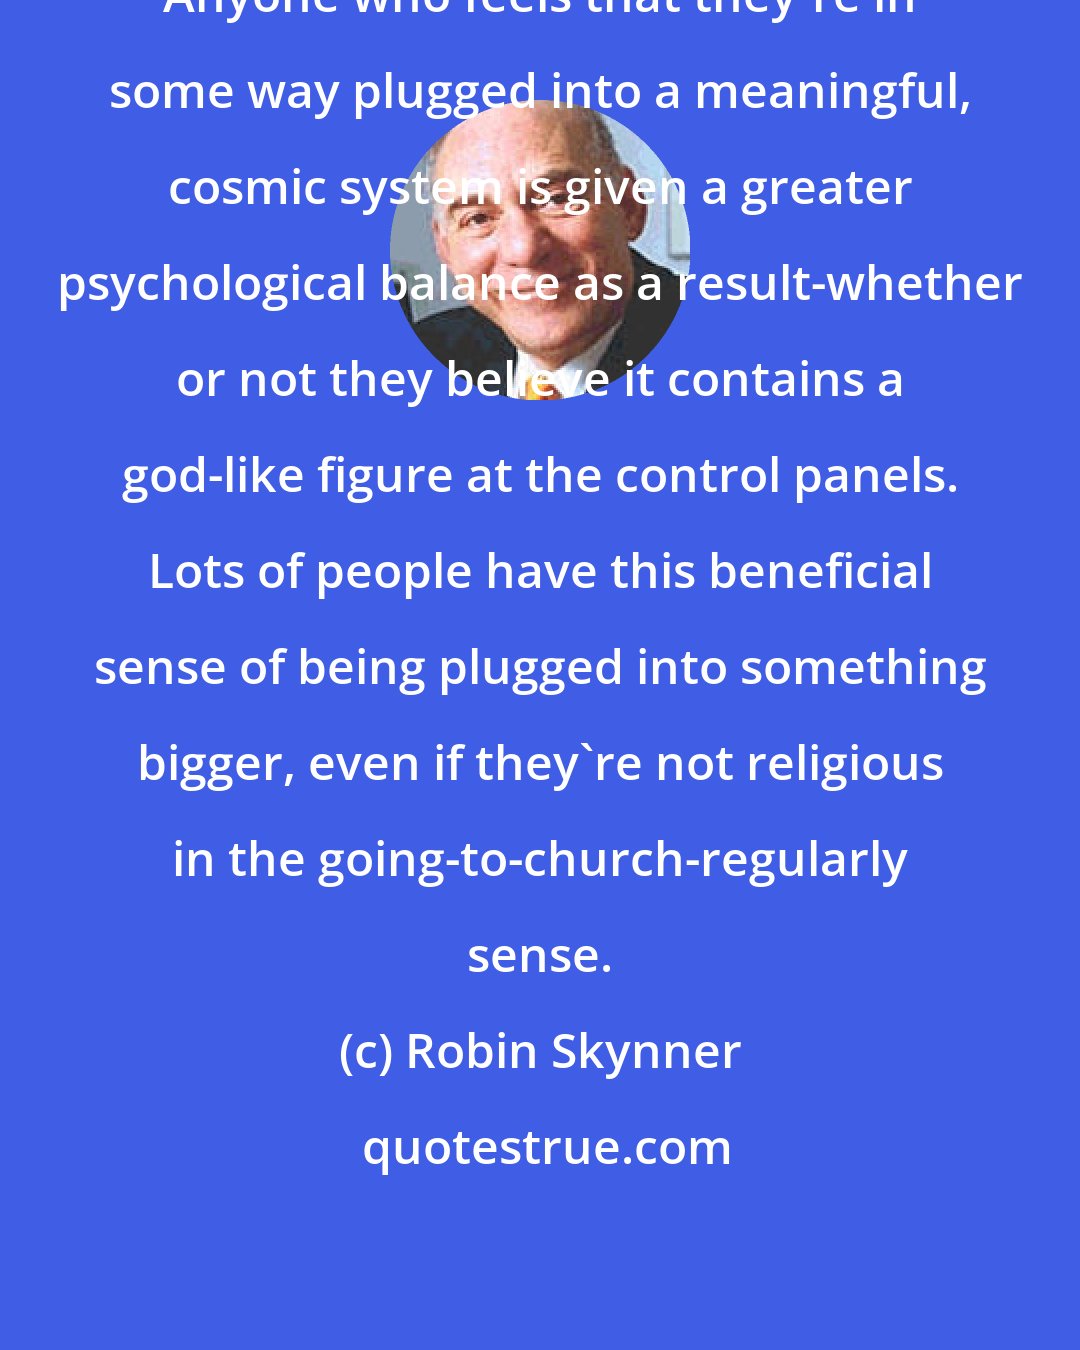 Robin Skynner: Anyone who feels that they're in some way plugged into a meaningful, cosmic system is given a greater psychological balance as a result-whether or not they believe it contains a god-like figure at the control panels. Lots of people have this beneficial sense of being plugged into something bigger, even if they're not religious in the going-to-church-regularly sense.